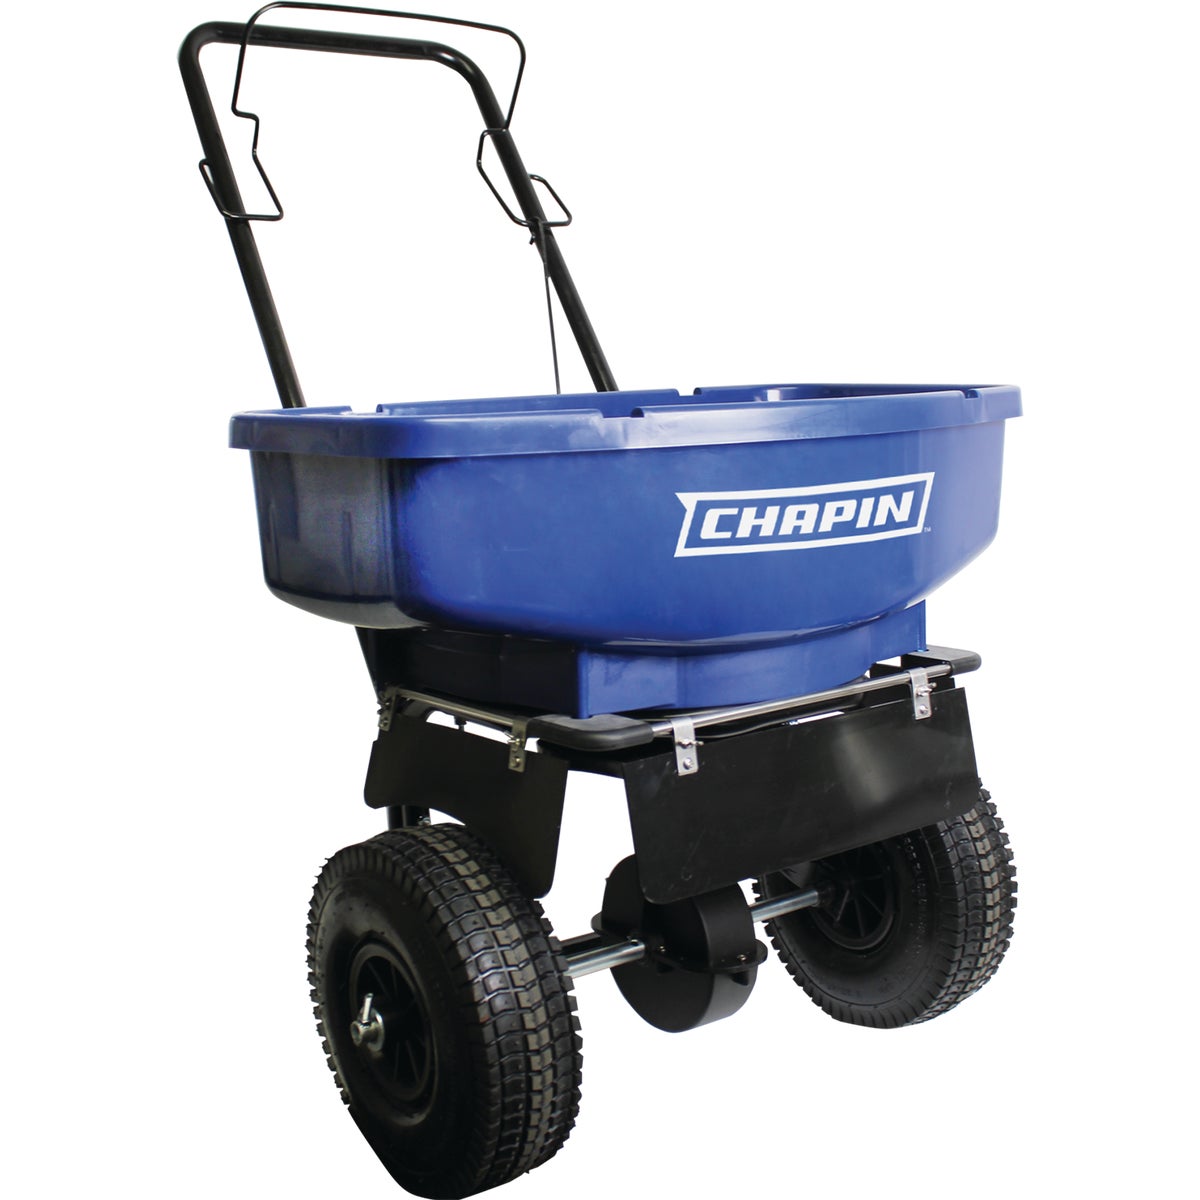 Item 730754, Residential salt spreader features: U-shaped flip up handle with 